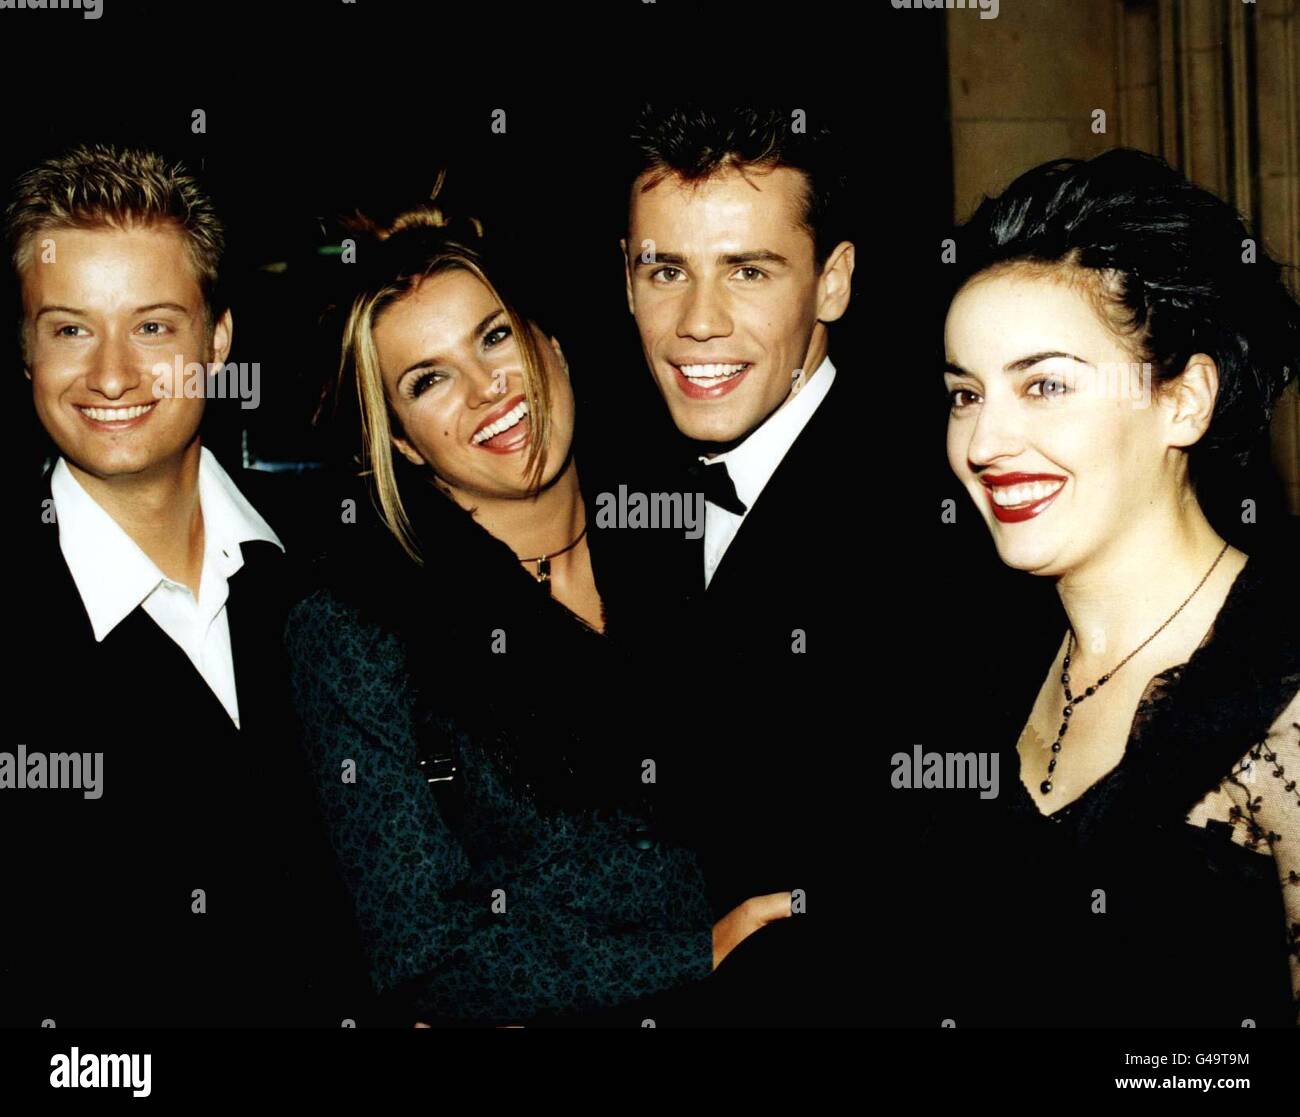 PA NEWS PHOTO 7/10/97 THE BLUE PETER TEAM (LEFT TO RIGHT) STUART MILES, KATY HILL, RICHARD BACON AND ROMANA ANNUNZIO AT THE NATIONAL TELEVISION AWARDS AT THE ROYAL ALBERT HALL IN LONDON Stock Photo